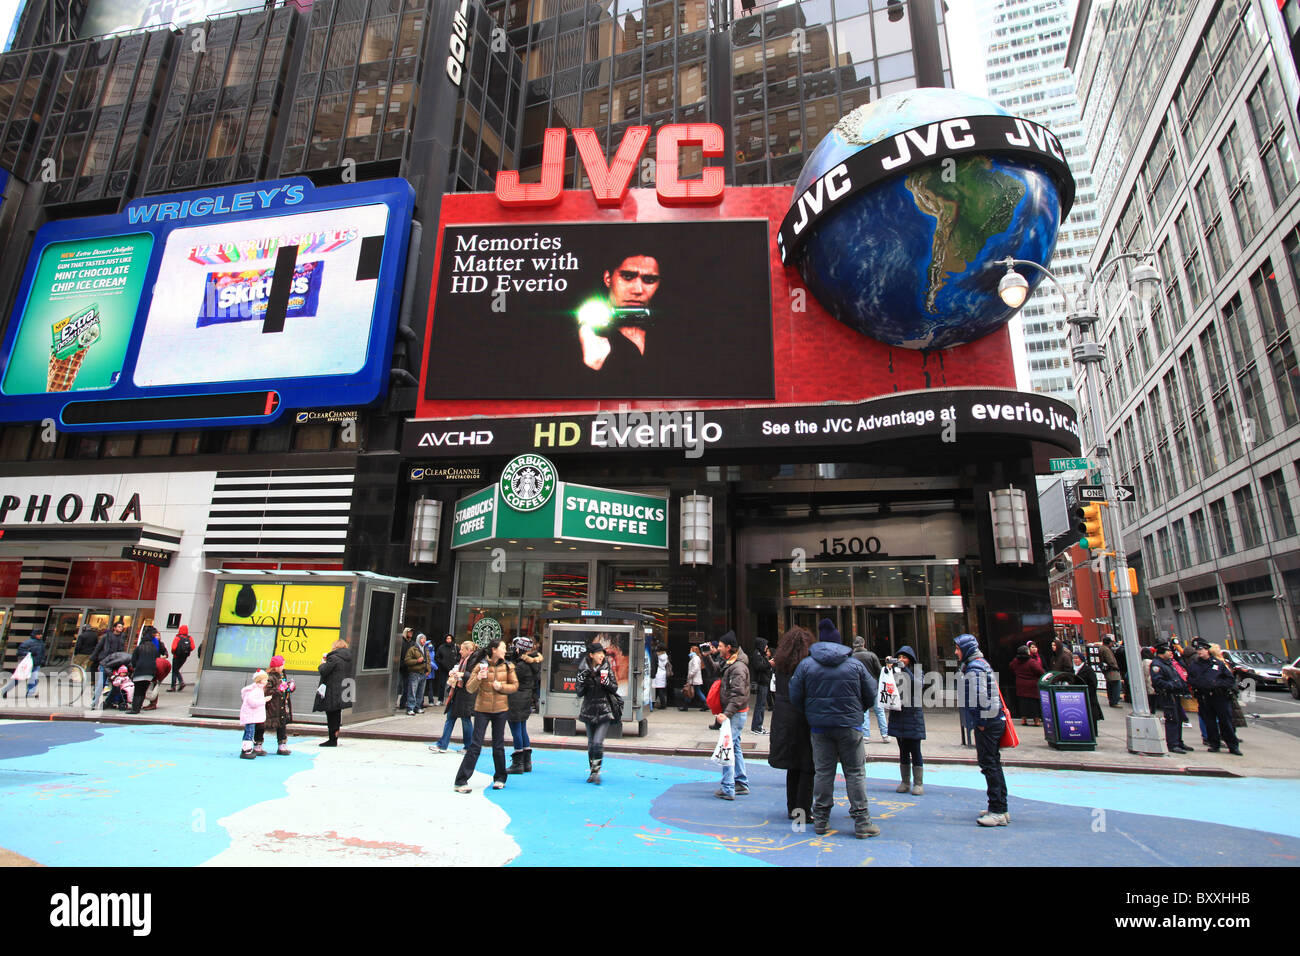 JVC billboards at New York Times Square, Christmas 2010 Stock Photo - Alamy